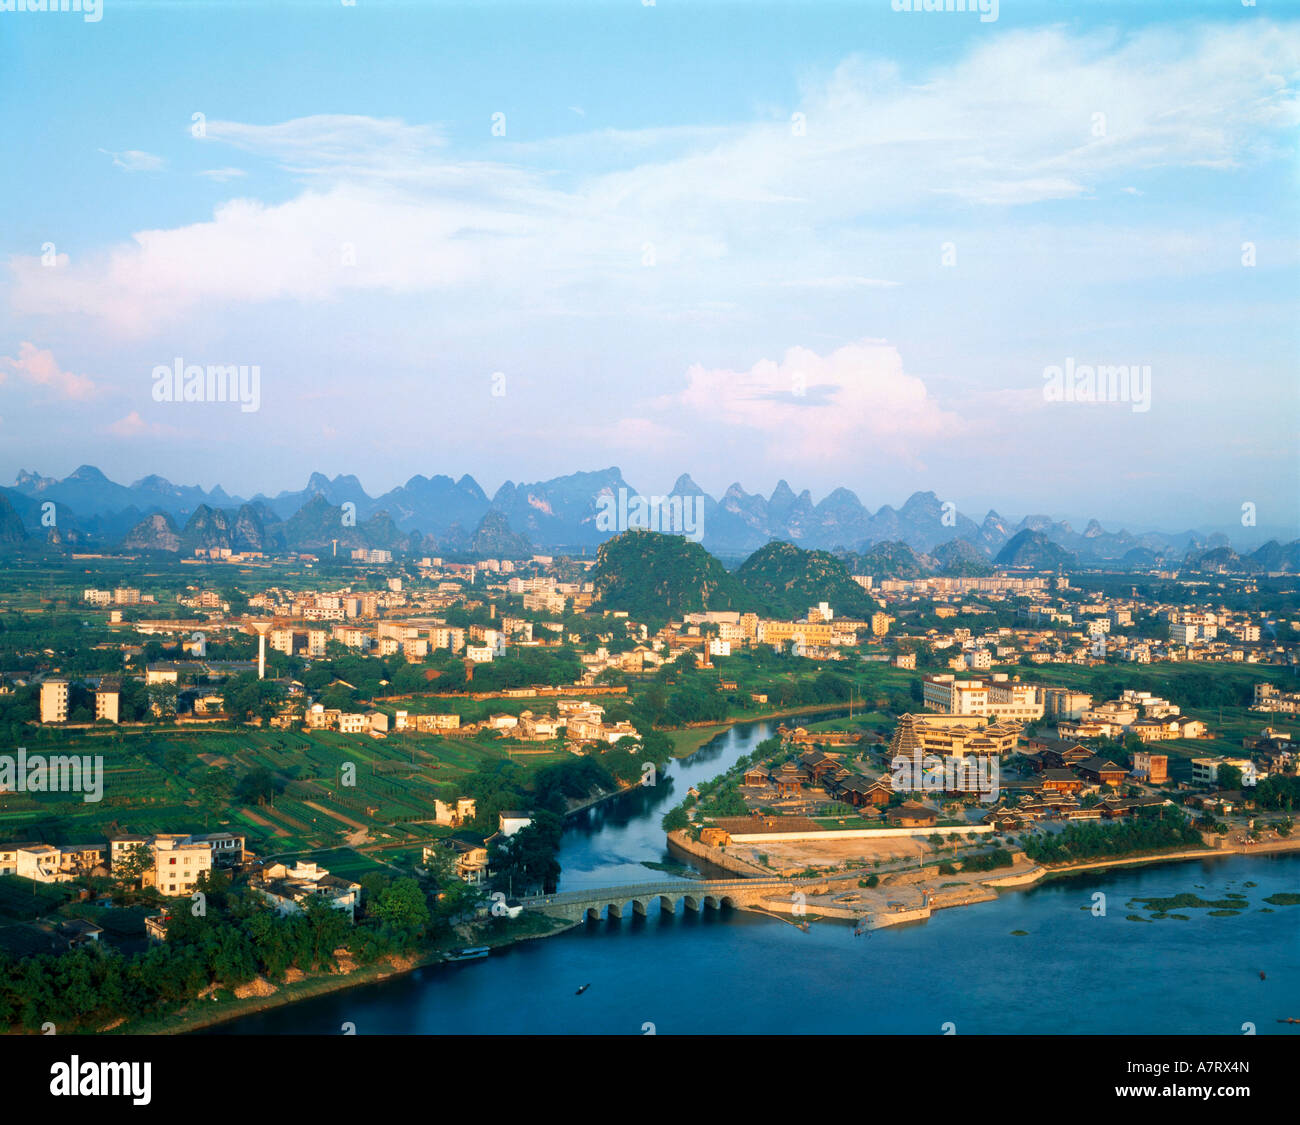 Aerial view of city, China Stock Photo